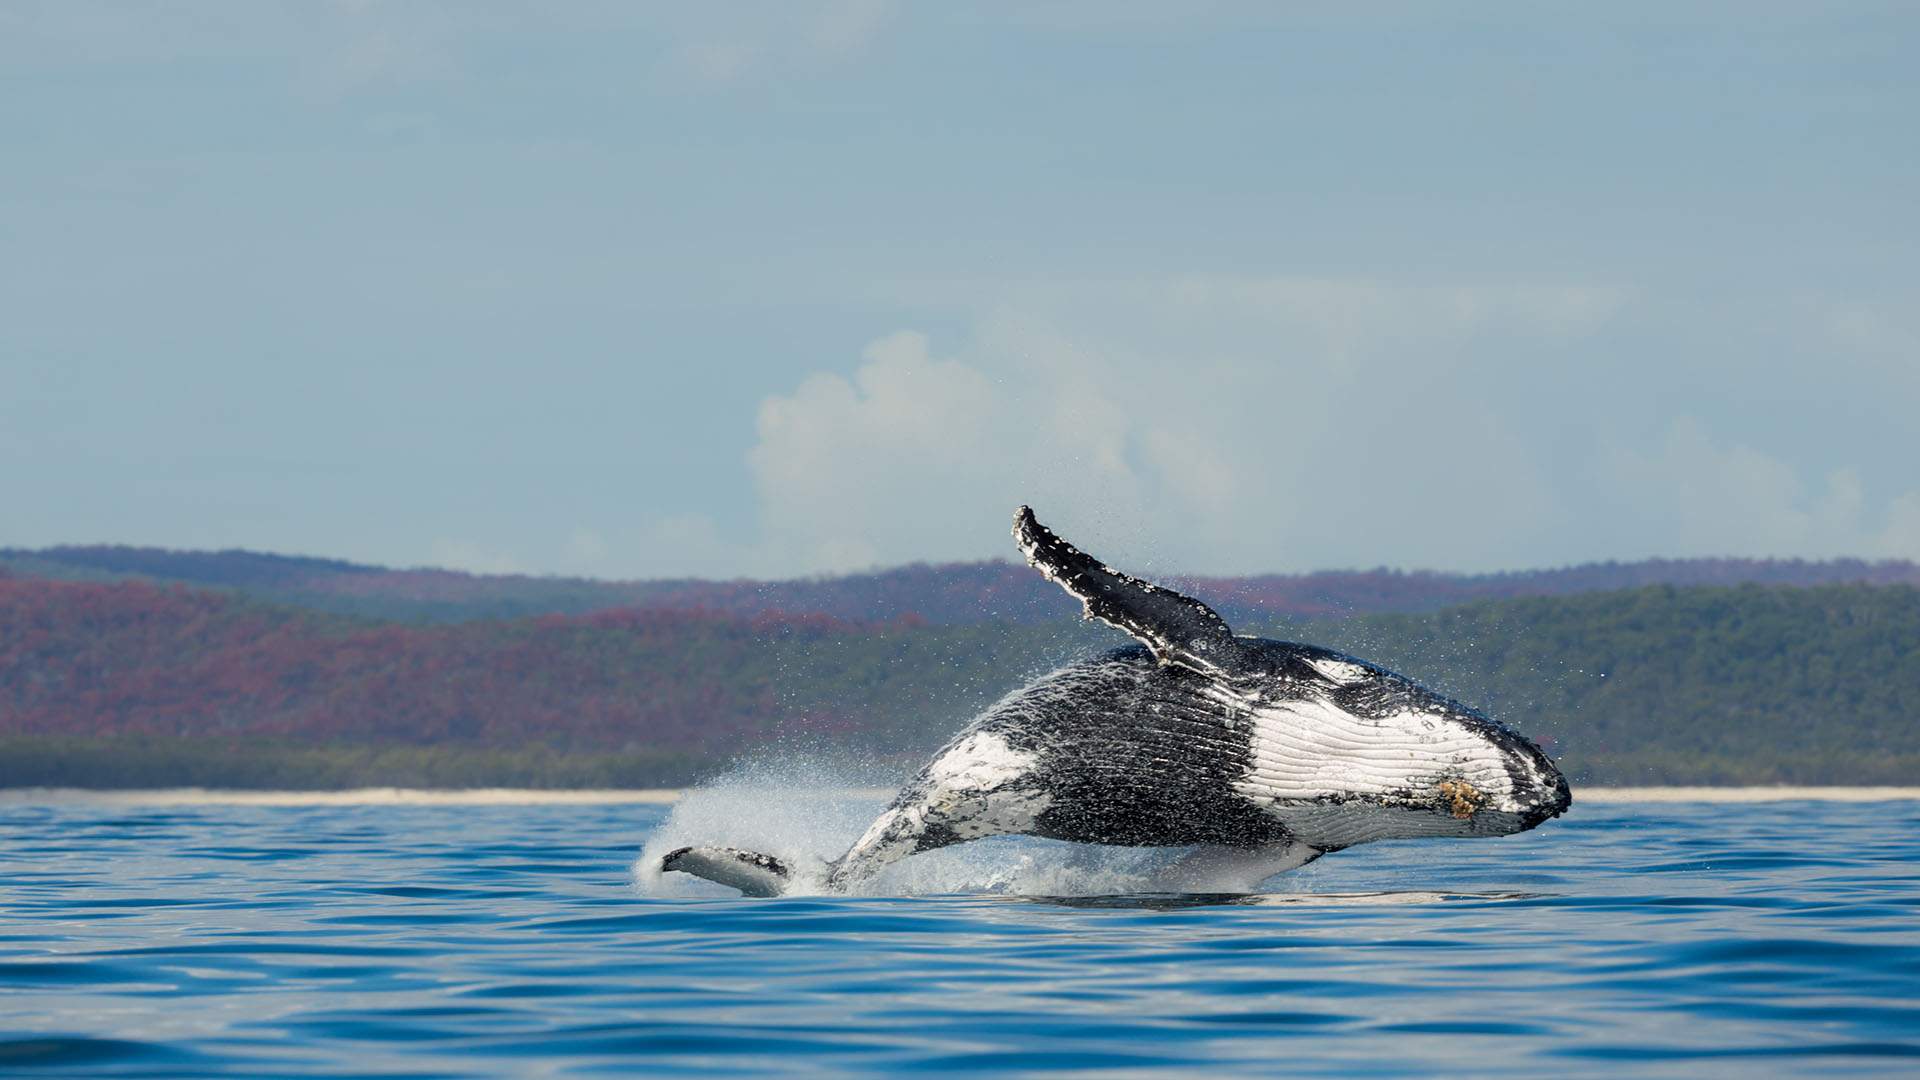 Australia Is Now Home to the World's First Whale Heritage Site